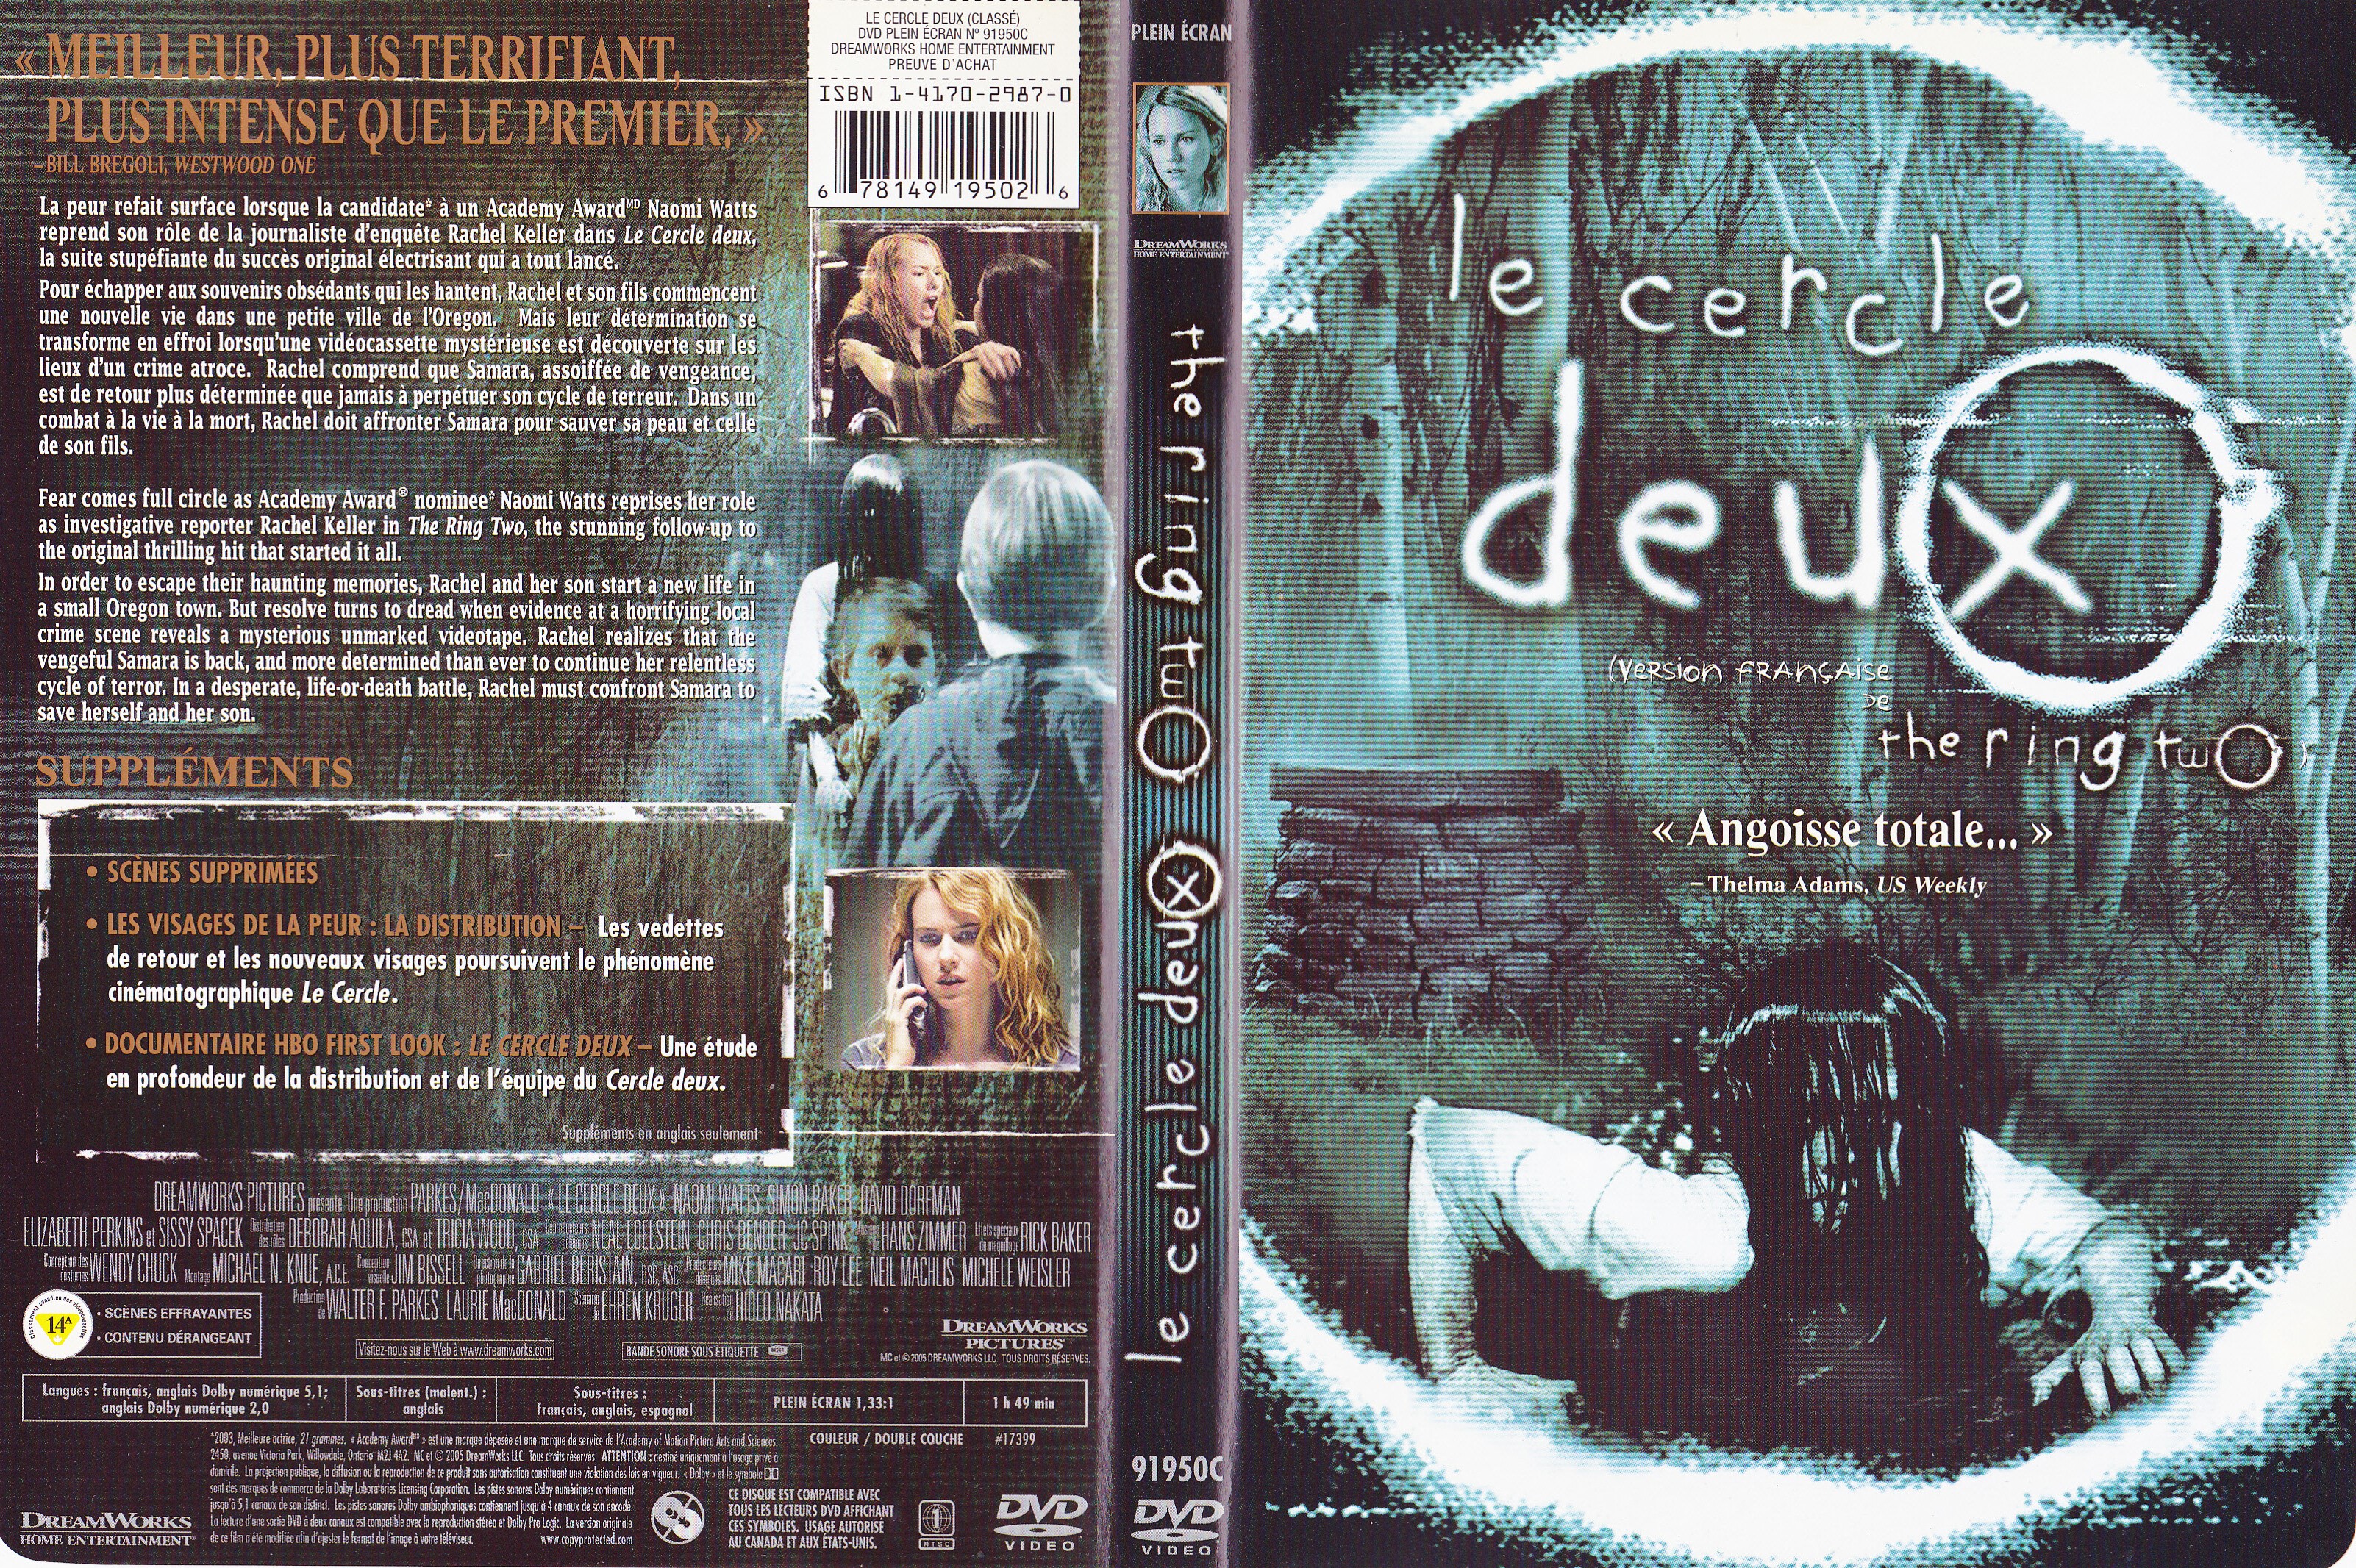 Jaquette DVD Le cercle 2 - The ring 2 (Canadienne)